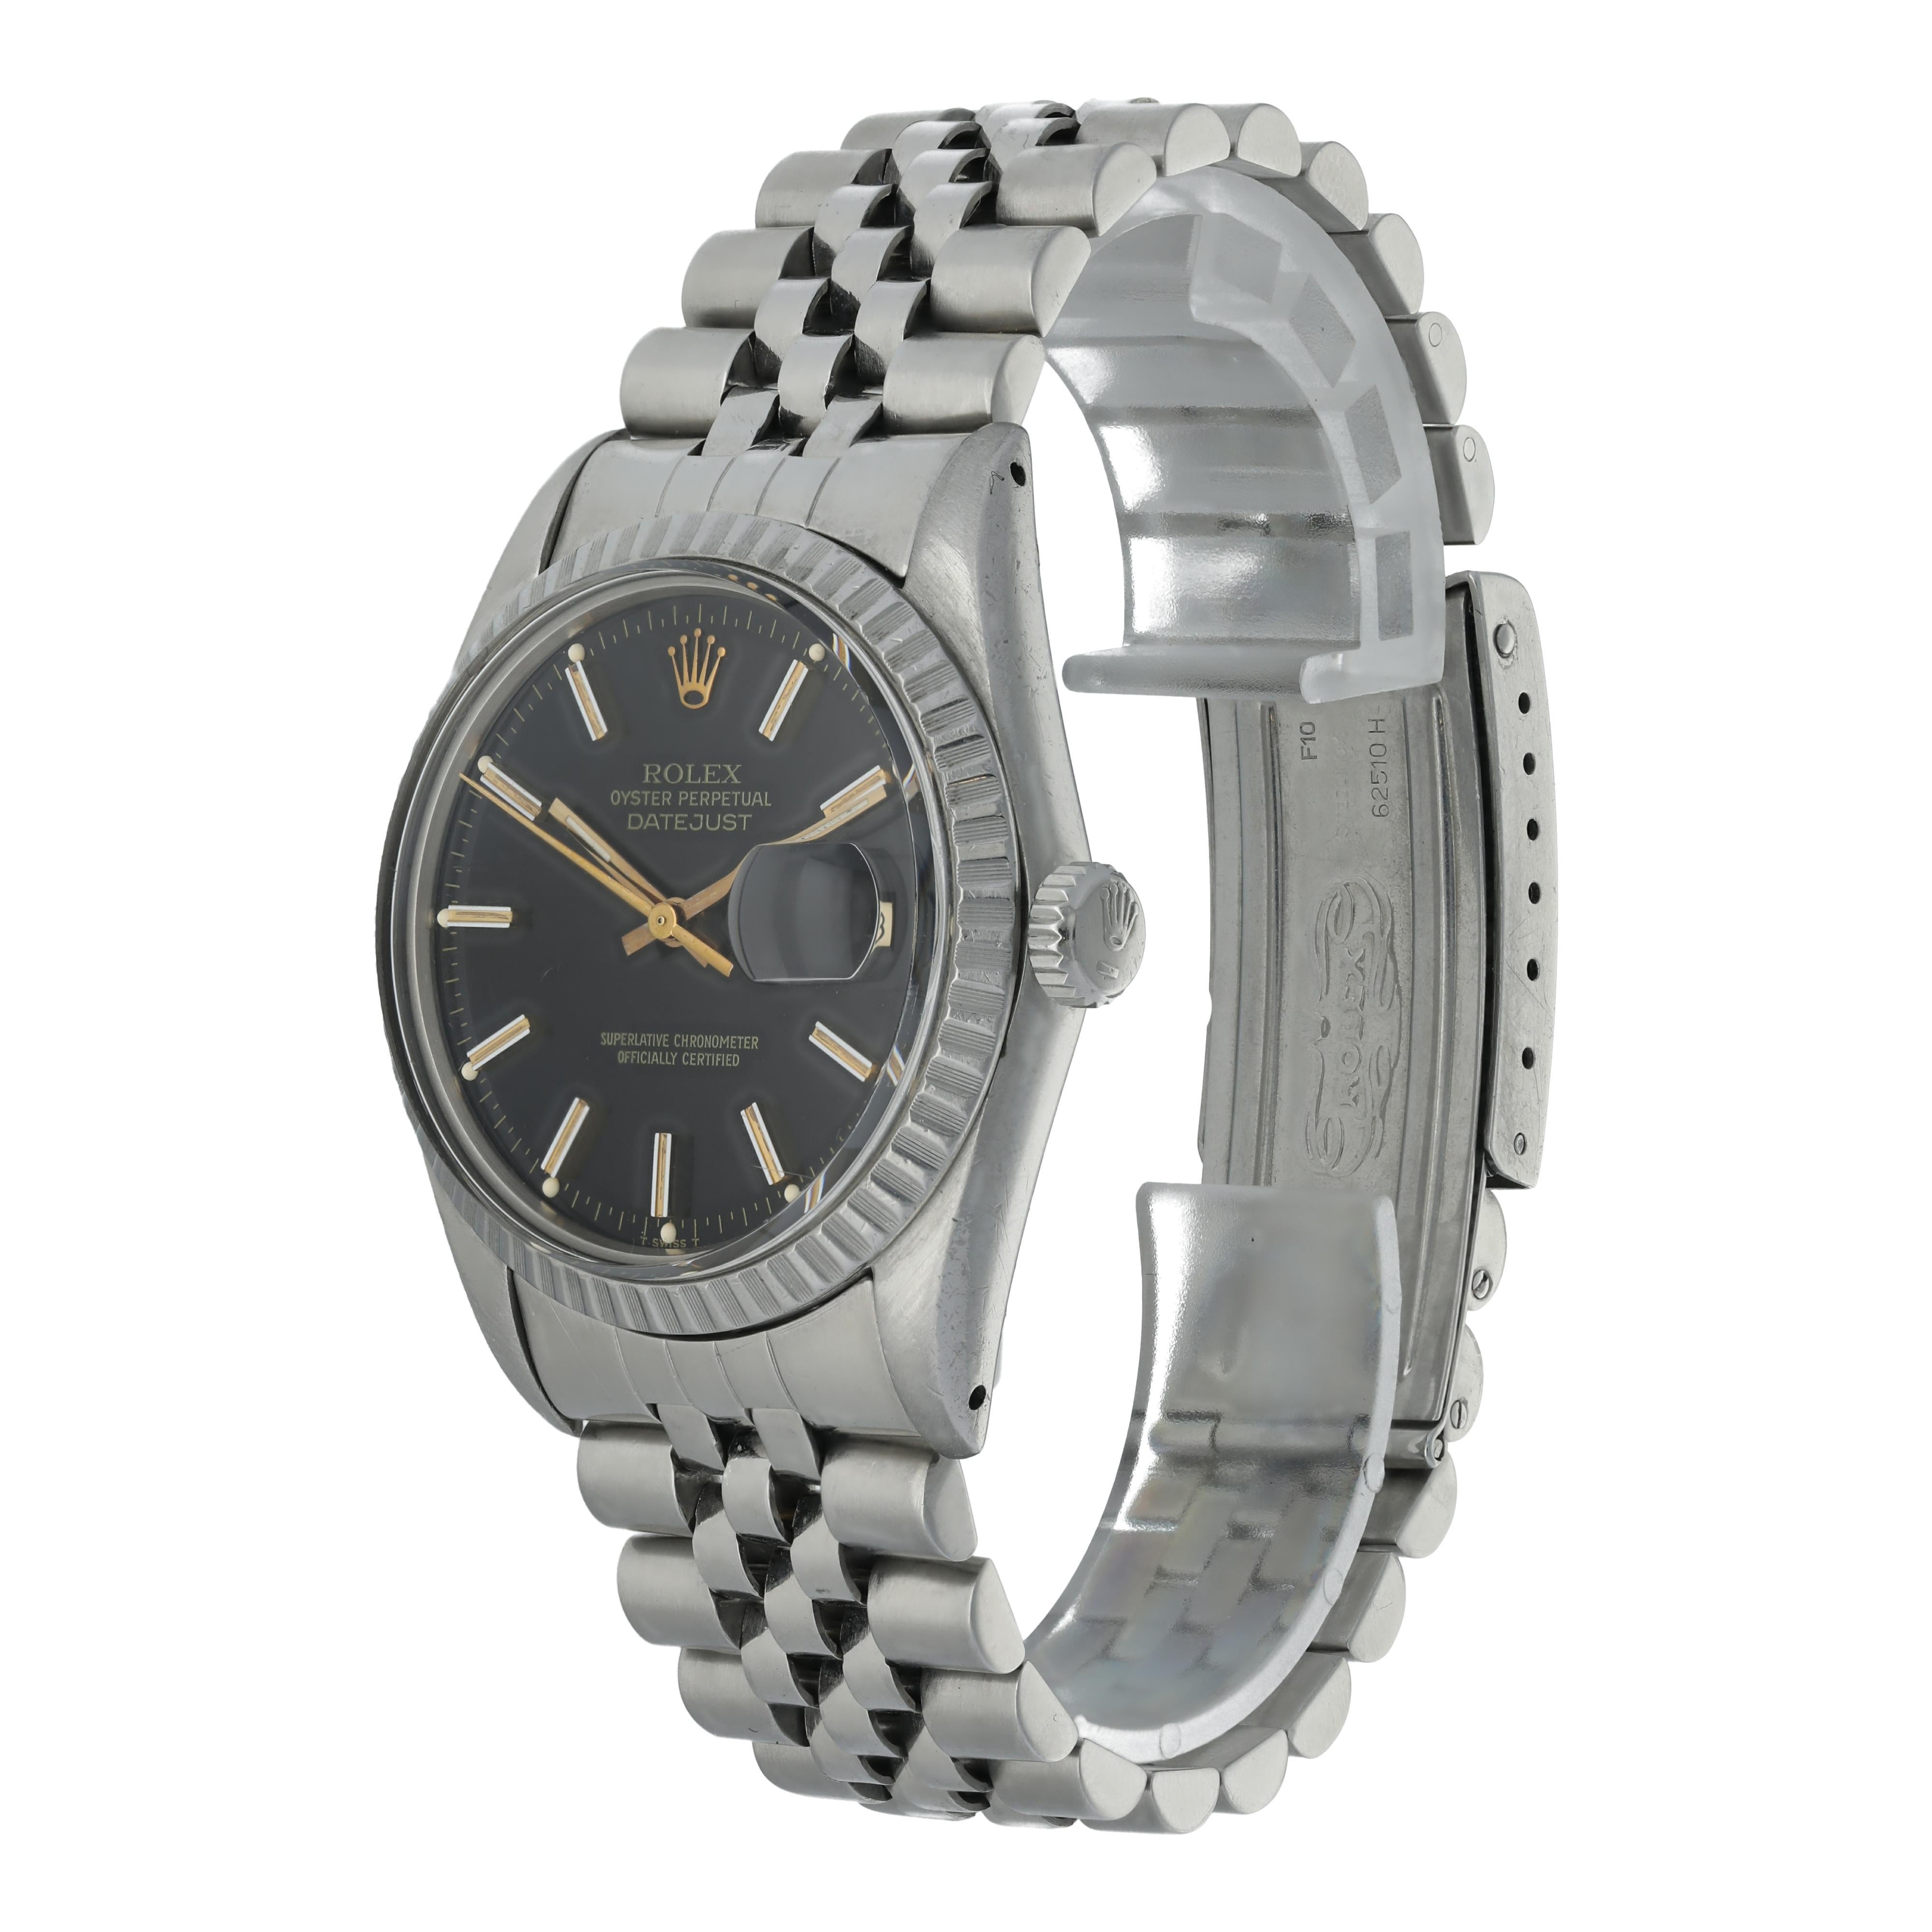 Rolex Datejust 16030 Men's Watch.
36mm Stainless Steel case. 
Stainless Steel fluted bezel. 
Black dial with luminous gold hands and index hour markers. 
Minute markers on the outer dial. 
Date display at the 3 o'clock position. 
Stainless Steel